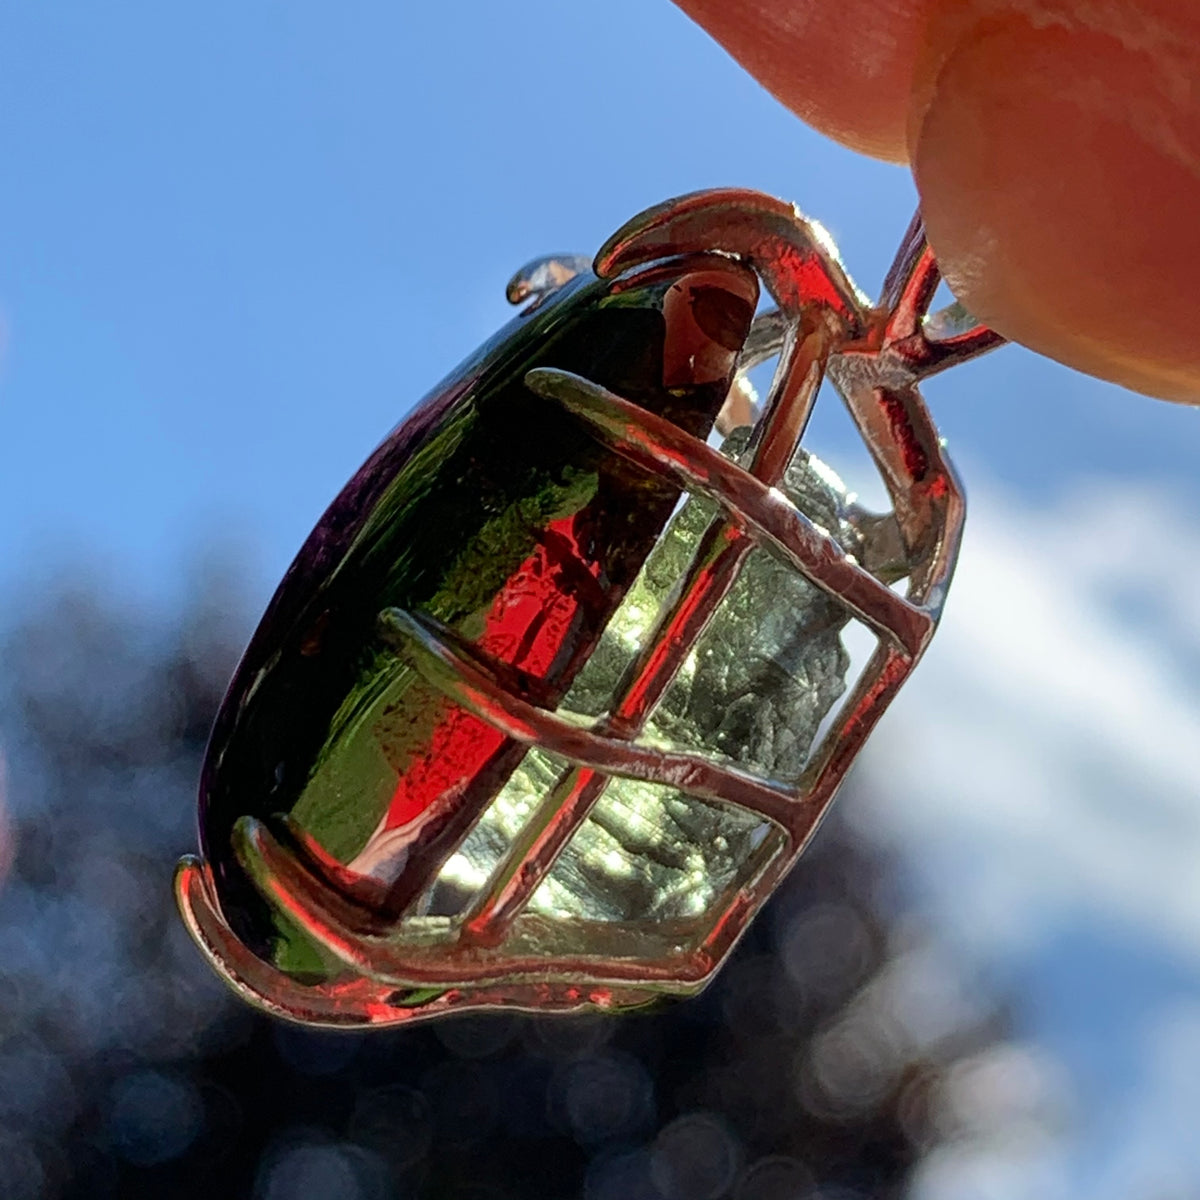 sterling silver sericho pallasite meteorite and raw moldavite tektite basket pendant held up on display with sunlight shining through to show details